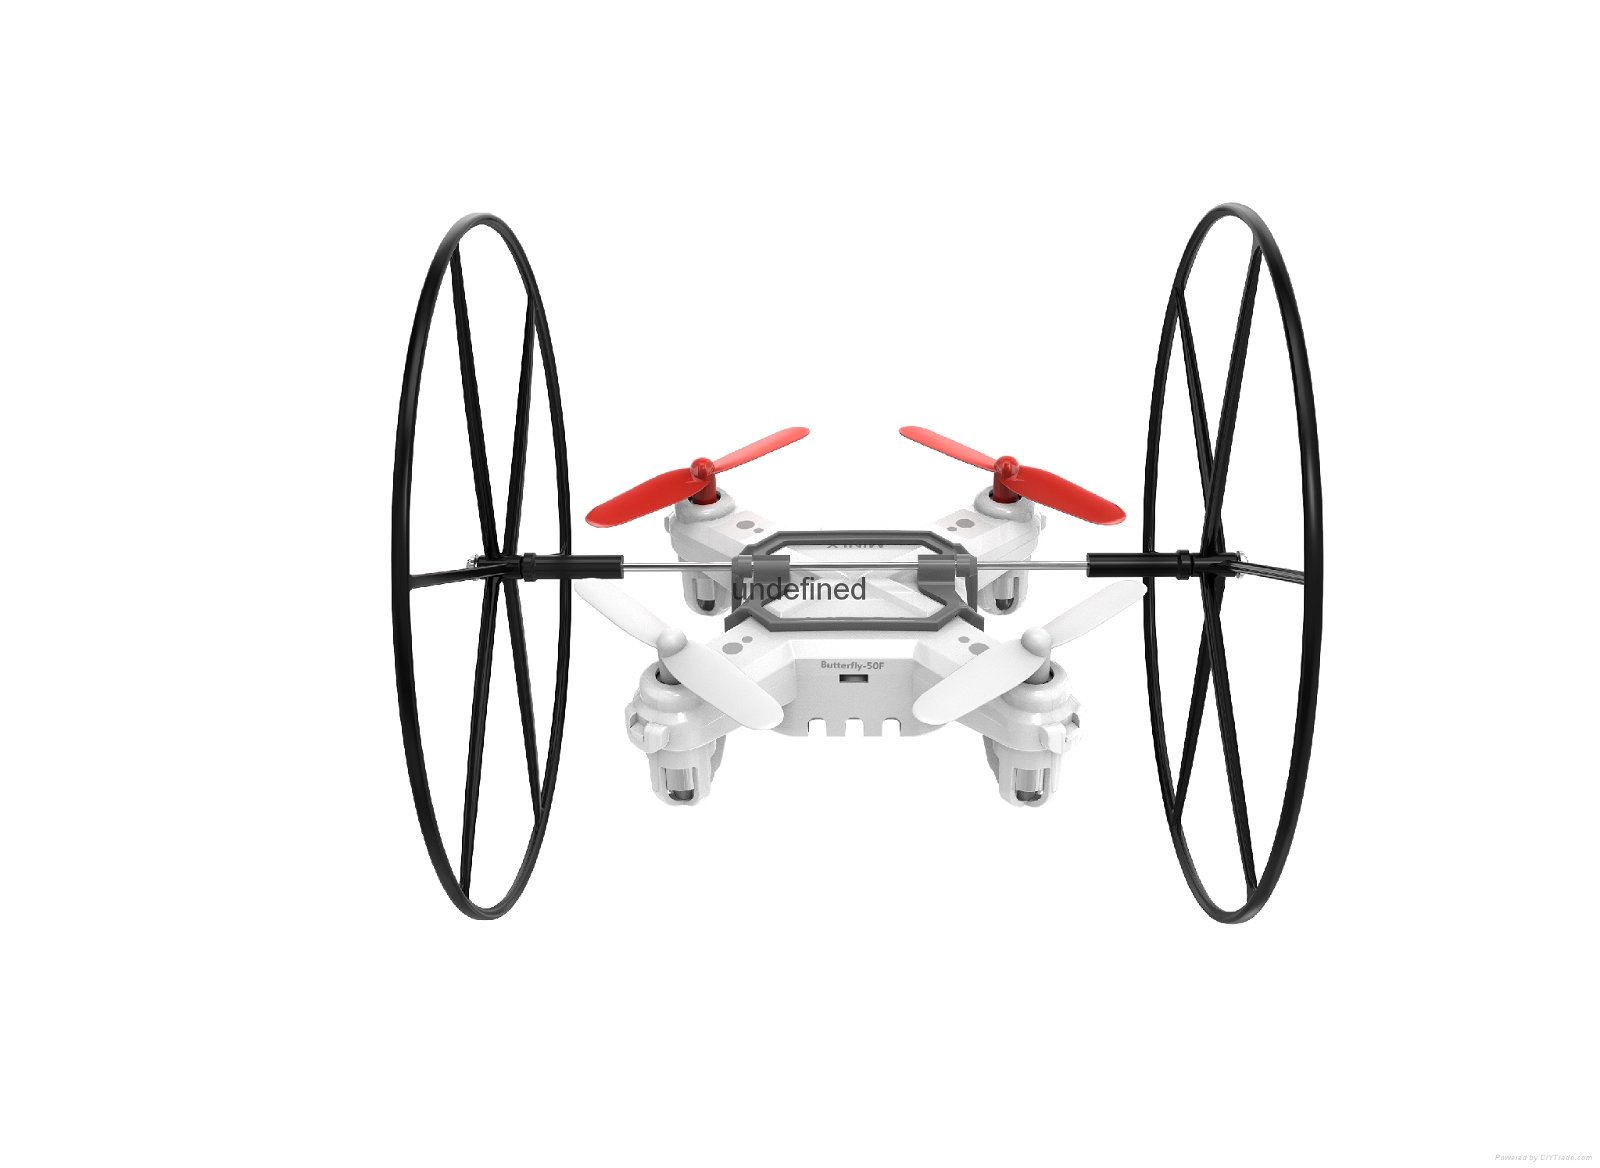 Apex Butterfly Quadcopter with Wheels 2.4G 6-Axis 4 Channels Uav Drone